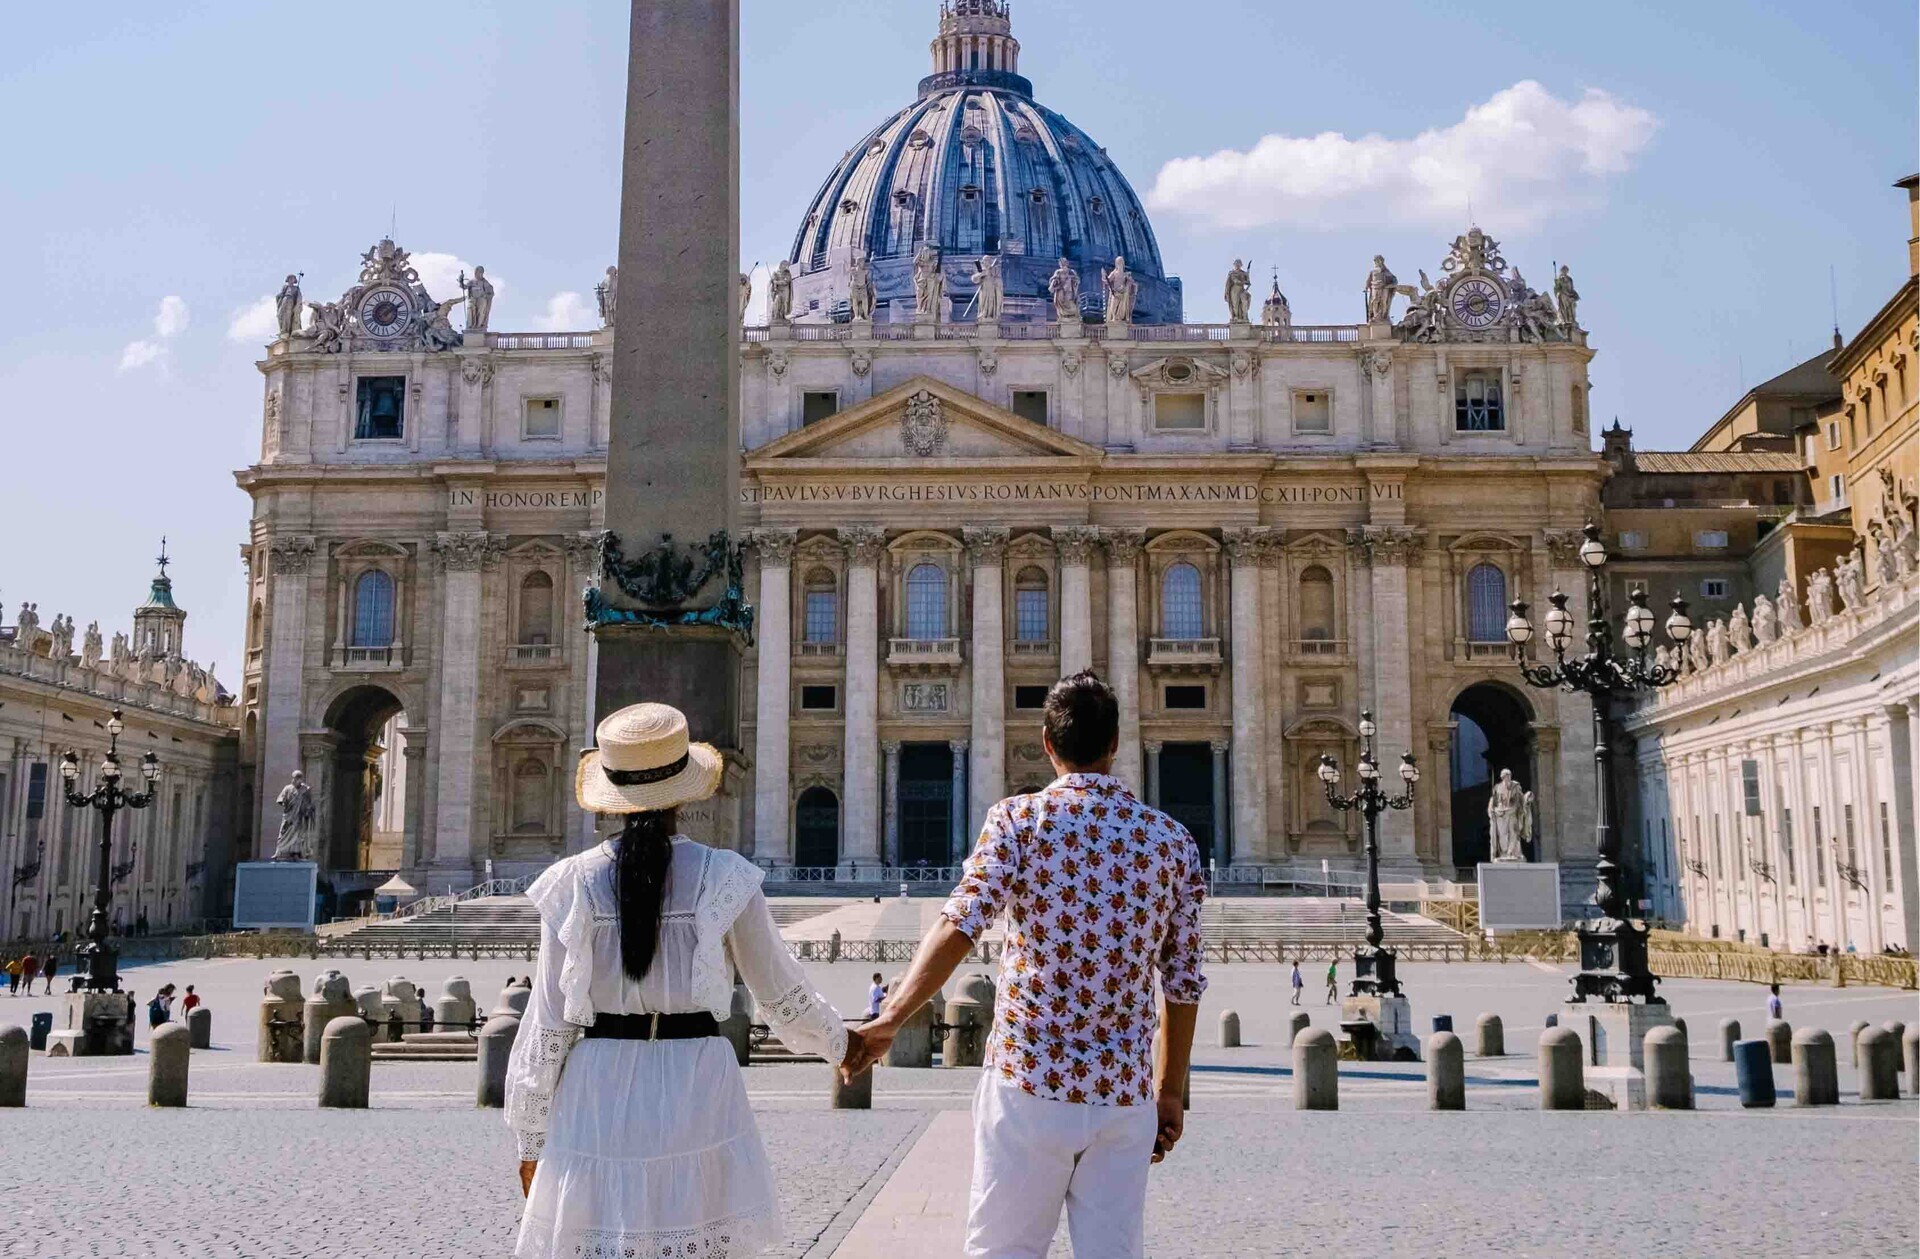 St. Peter’s Basilica & Dome Entry Ticket Audio Guided Tour